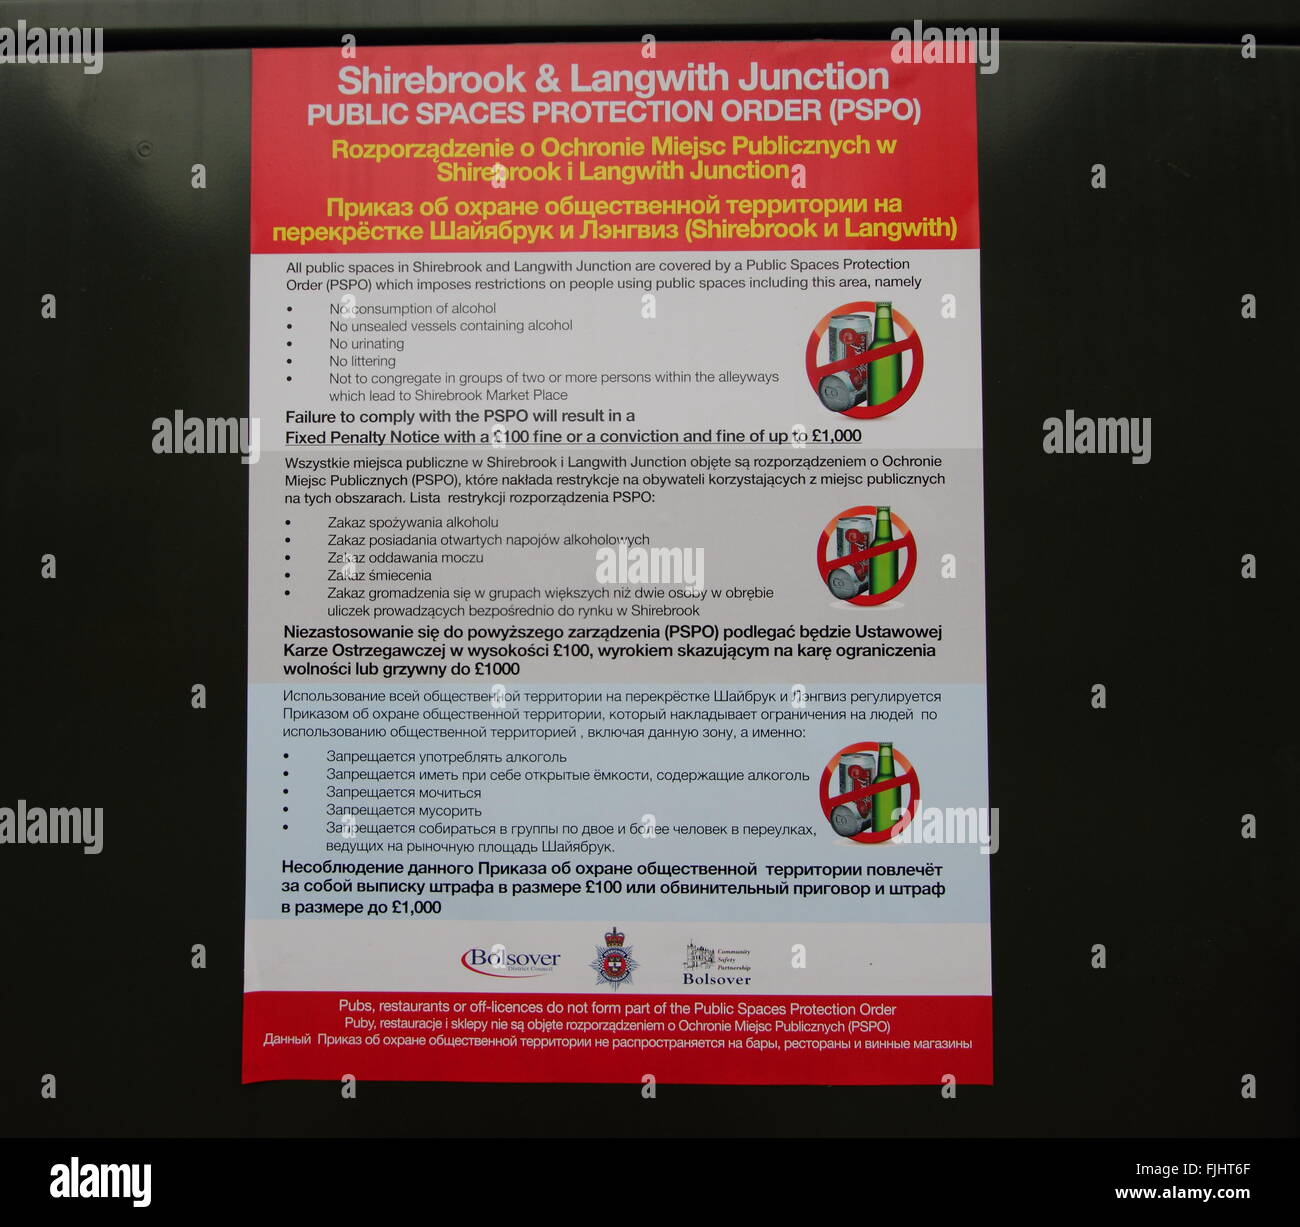 A  Public Spaces Protection Order notice in English and Polish on display in Shirebrook town in Derbyshire England UK. Stock Photo